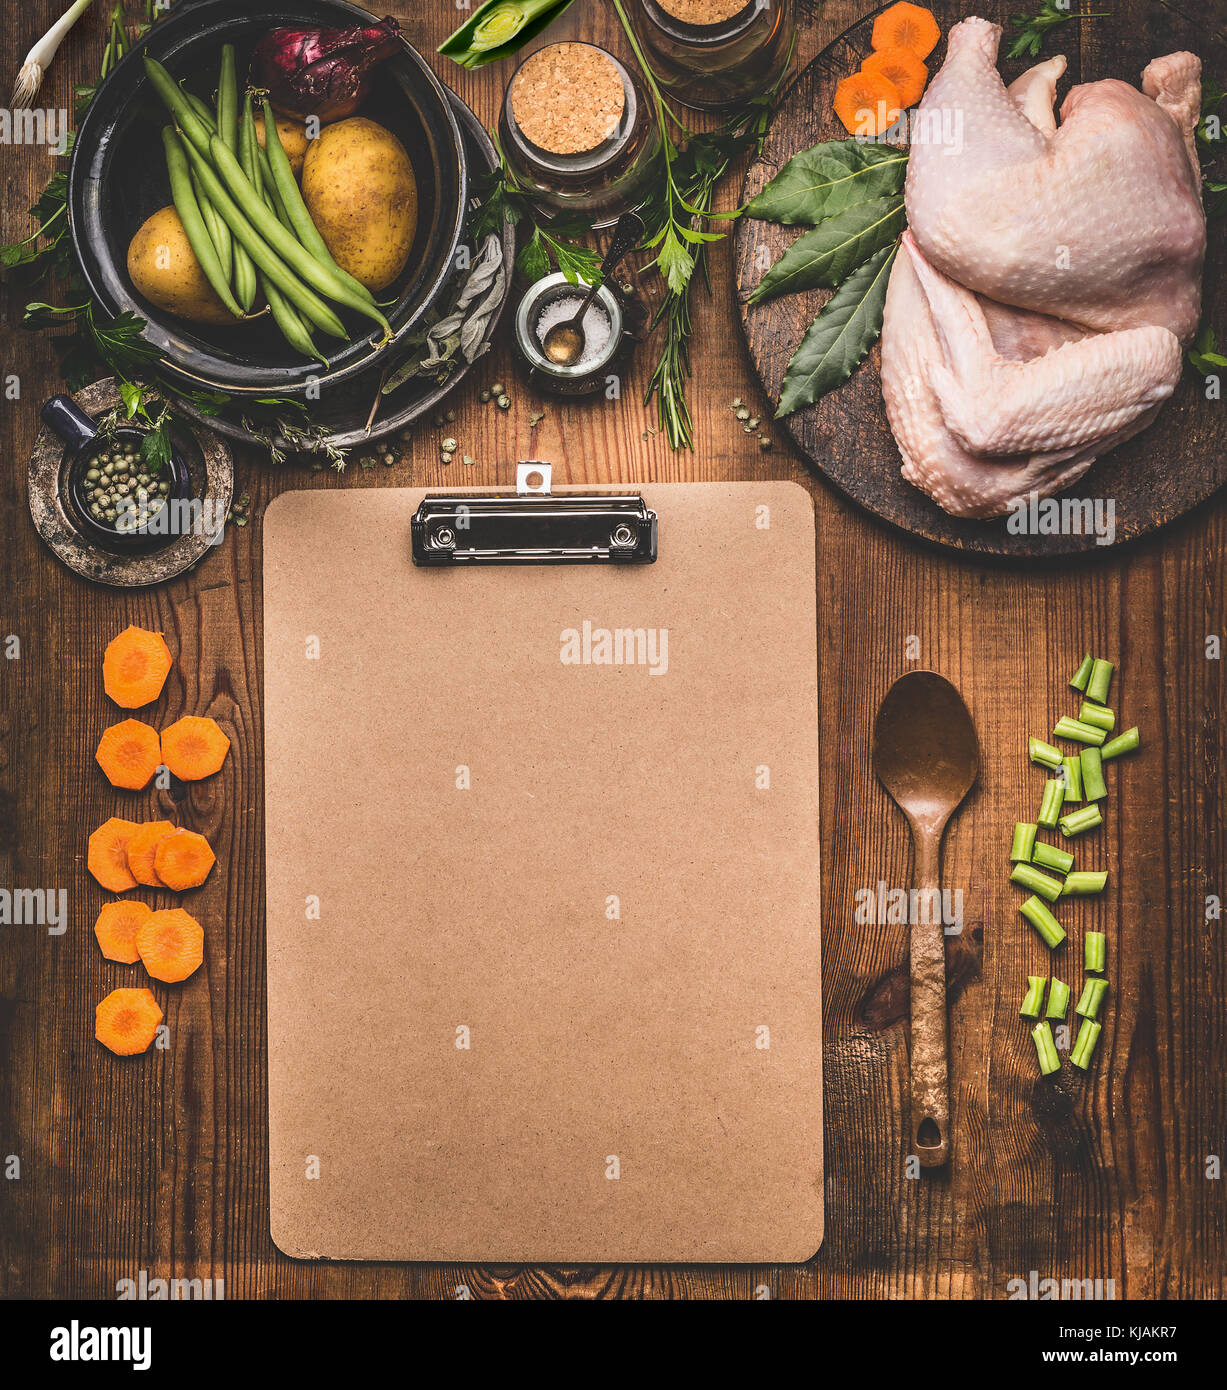 Chicken dishes cooking recipes background with empty cardboard clipboard  Whole chicken with various healthy cooking ingredients: chopped vegetables Stock Photo